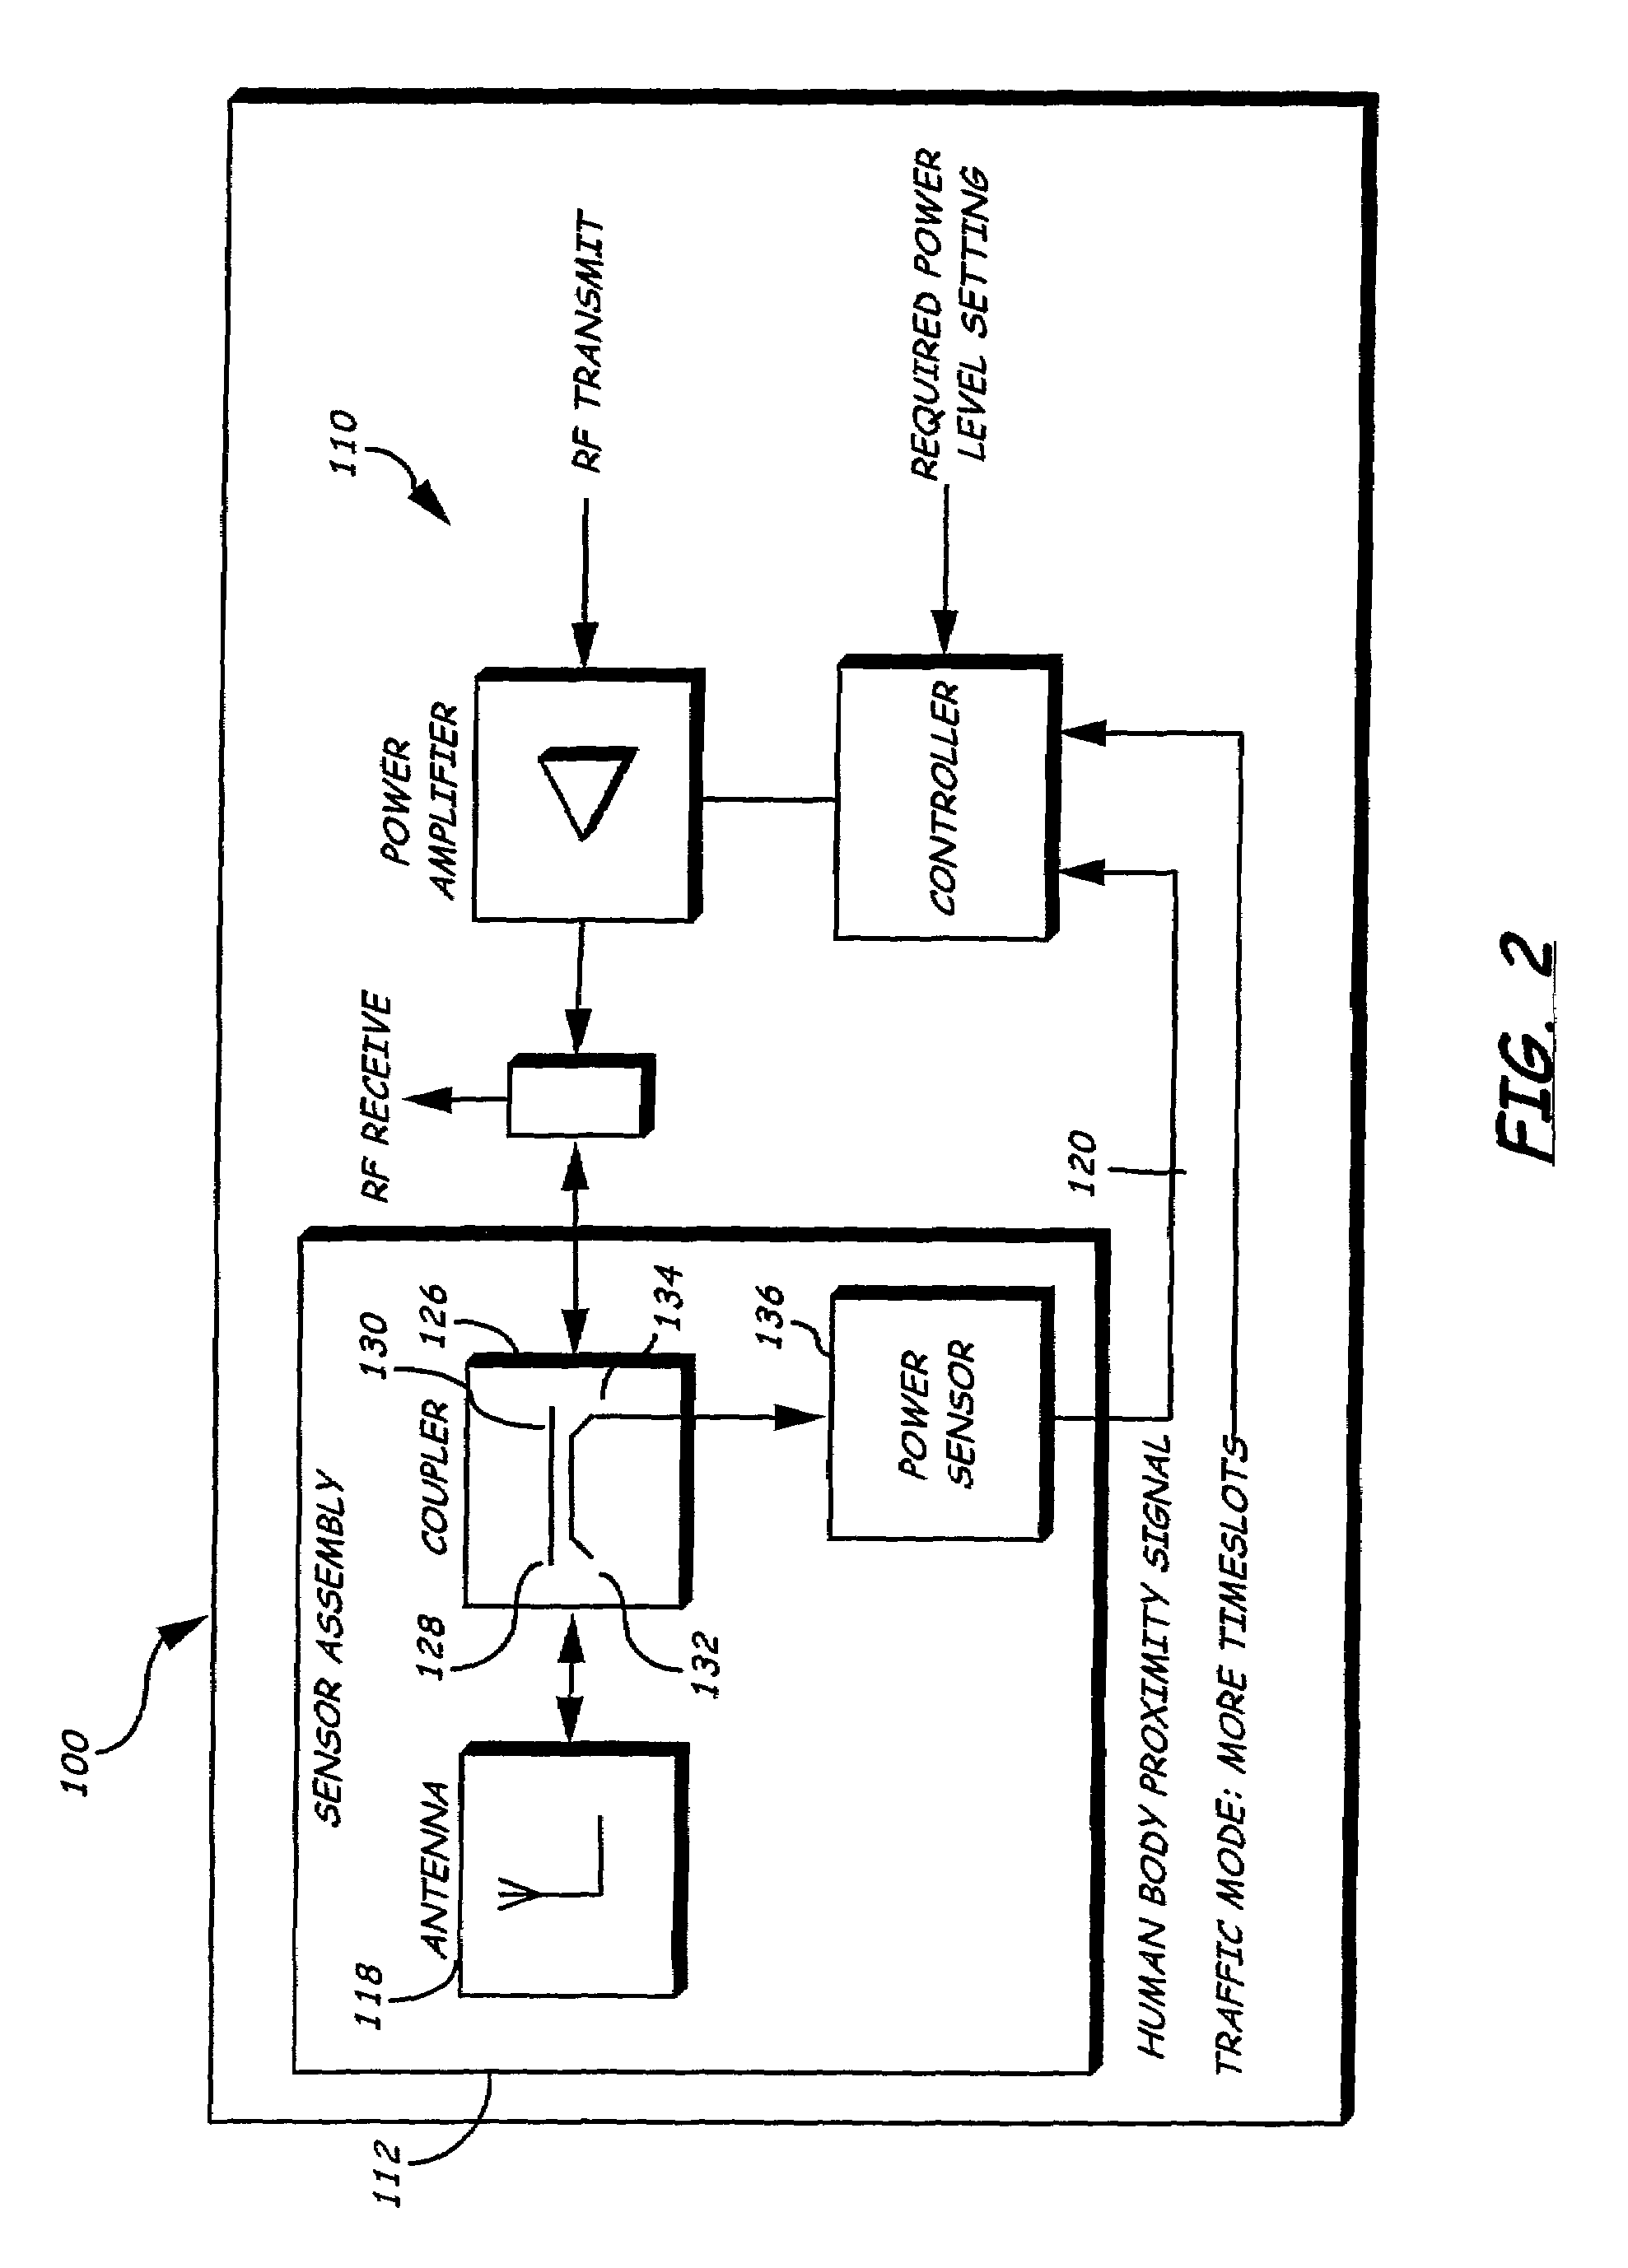 System and method for reducing SAR values